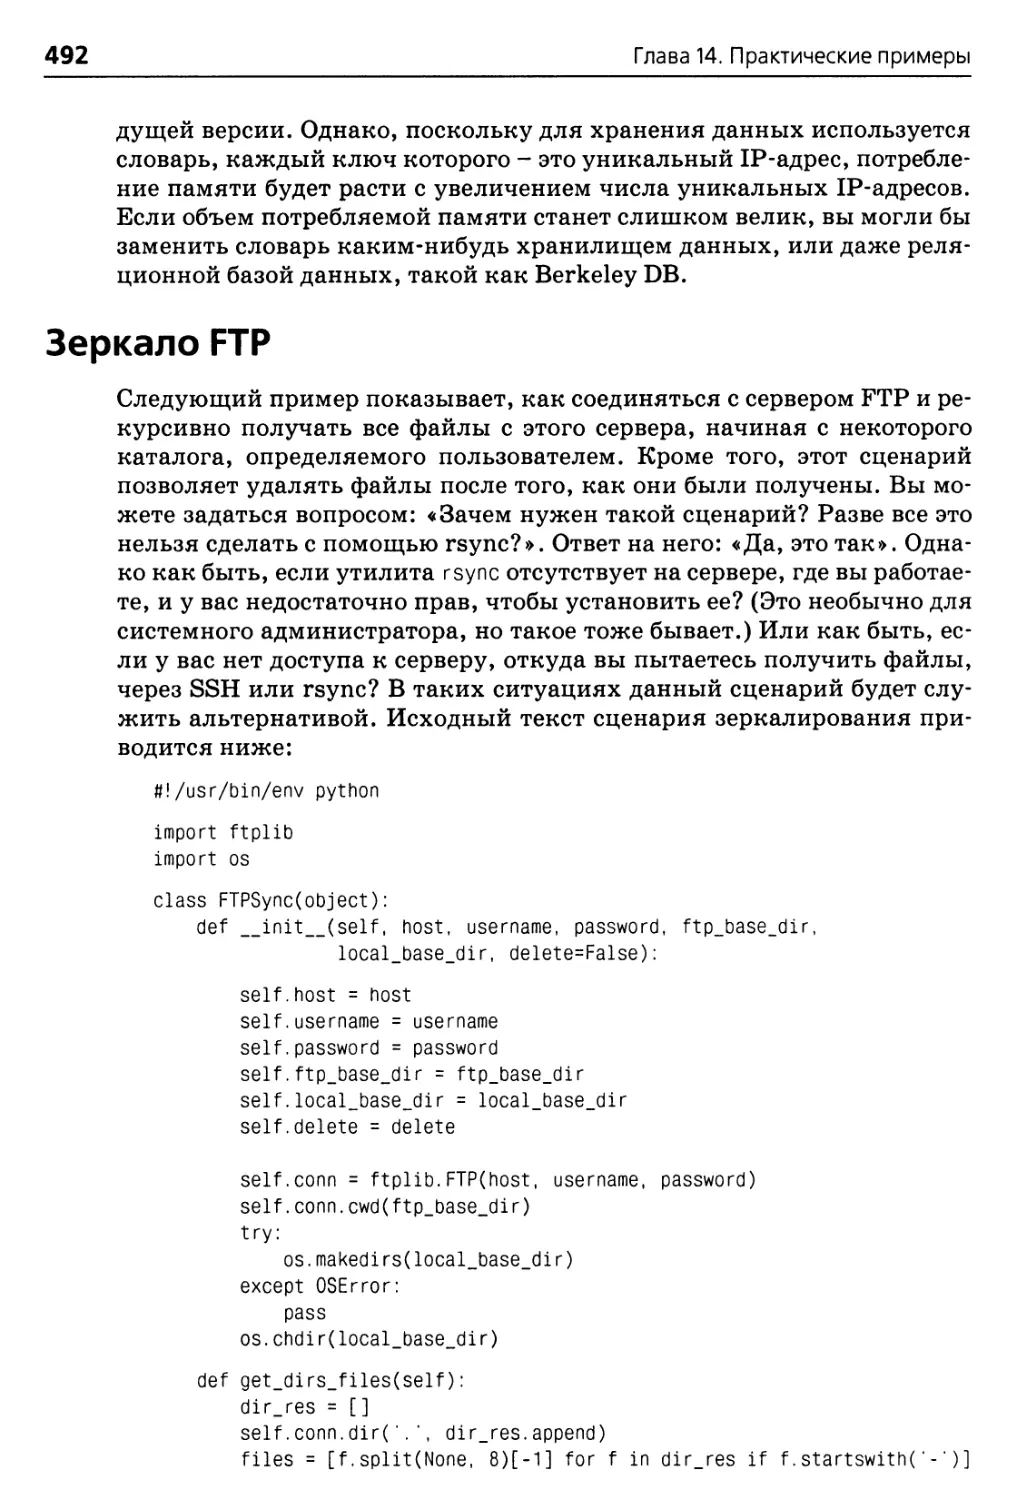 Зеркало FTP